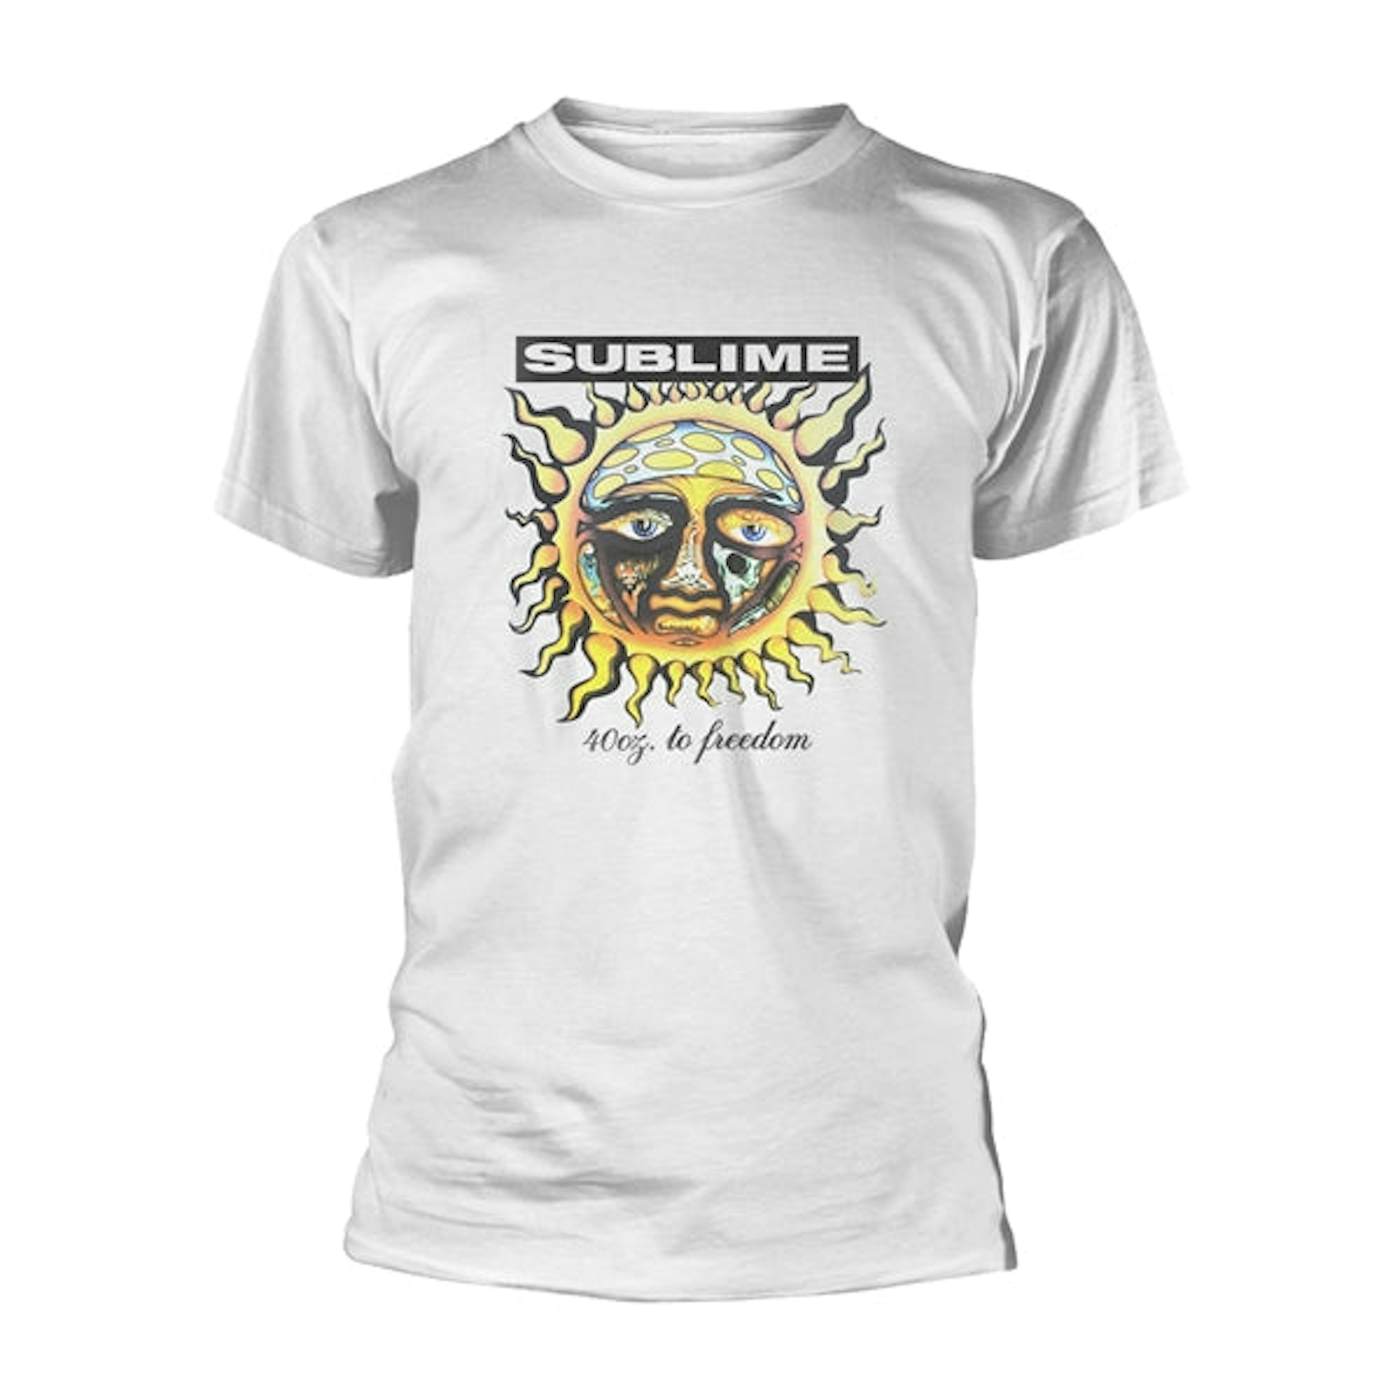 Sublime T Shirt - 40Oz To Freedom